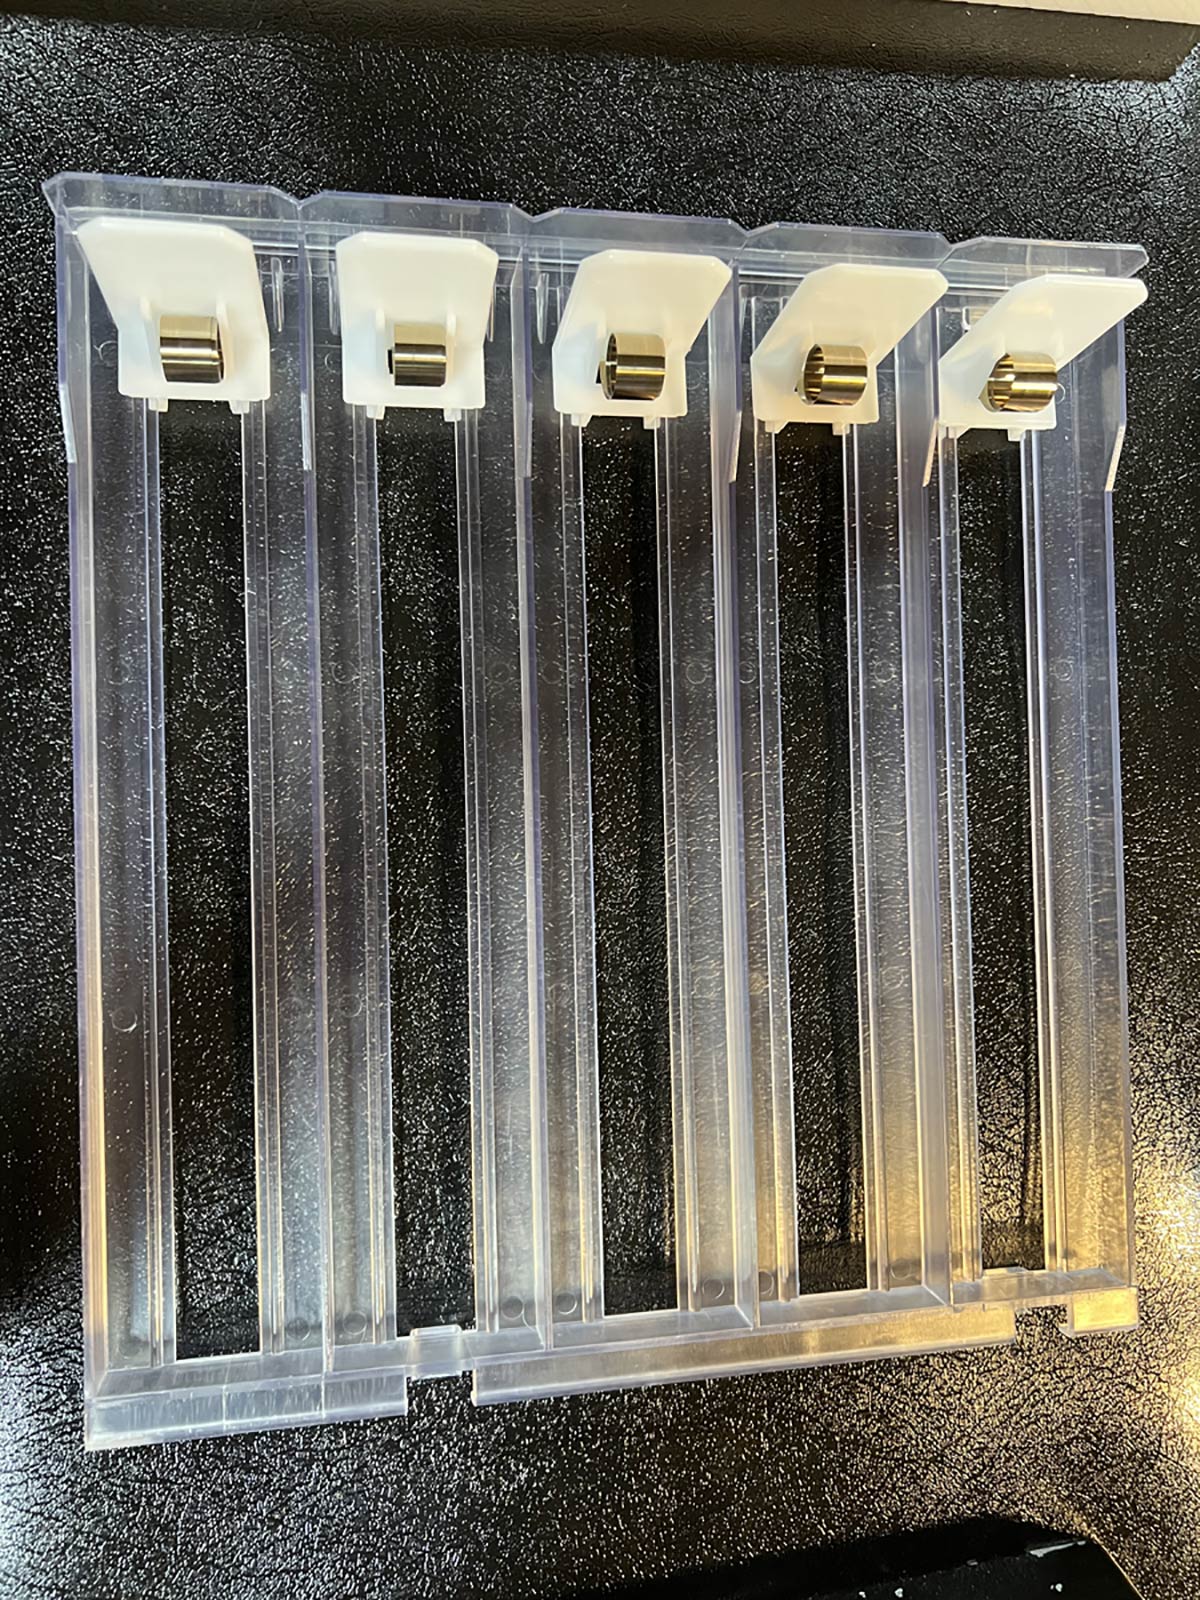 5-slot assembly made with injection molded parts to hold cigarette packs